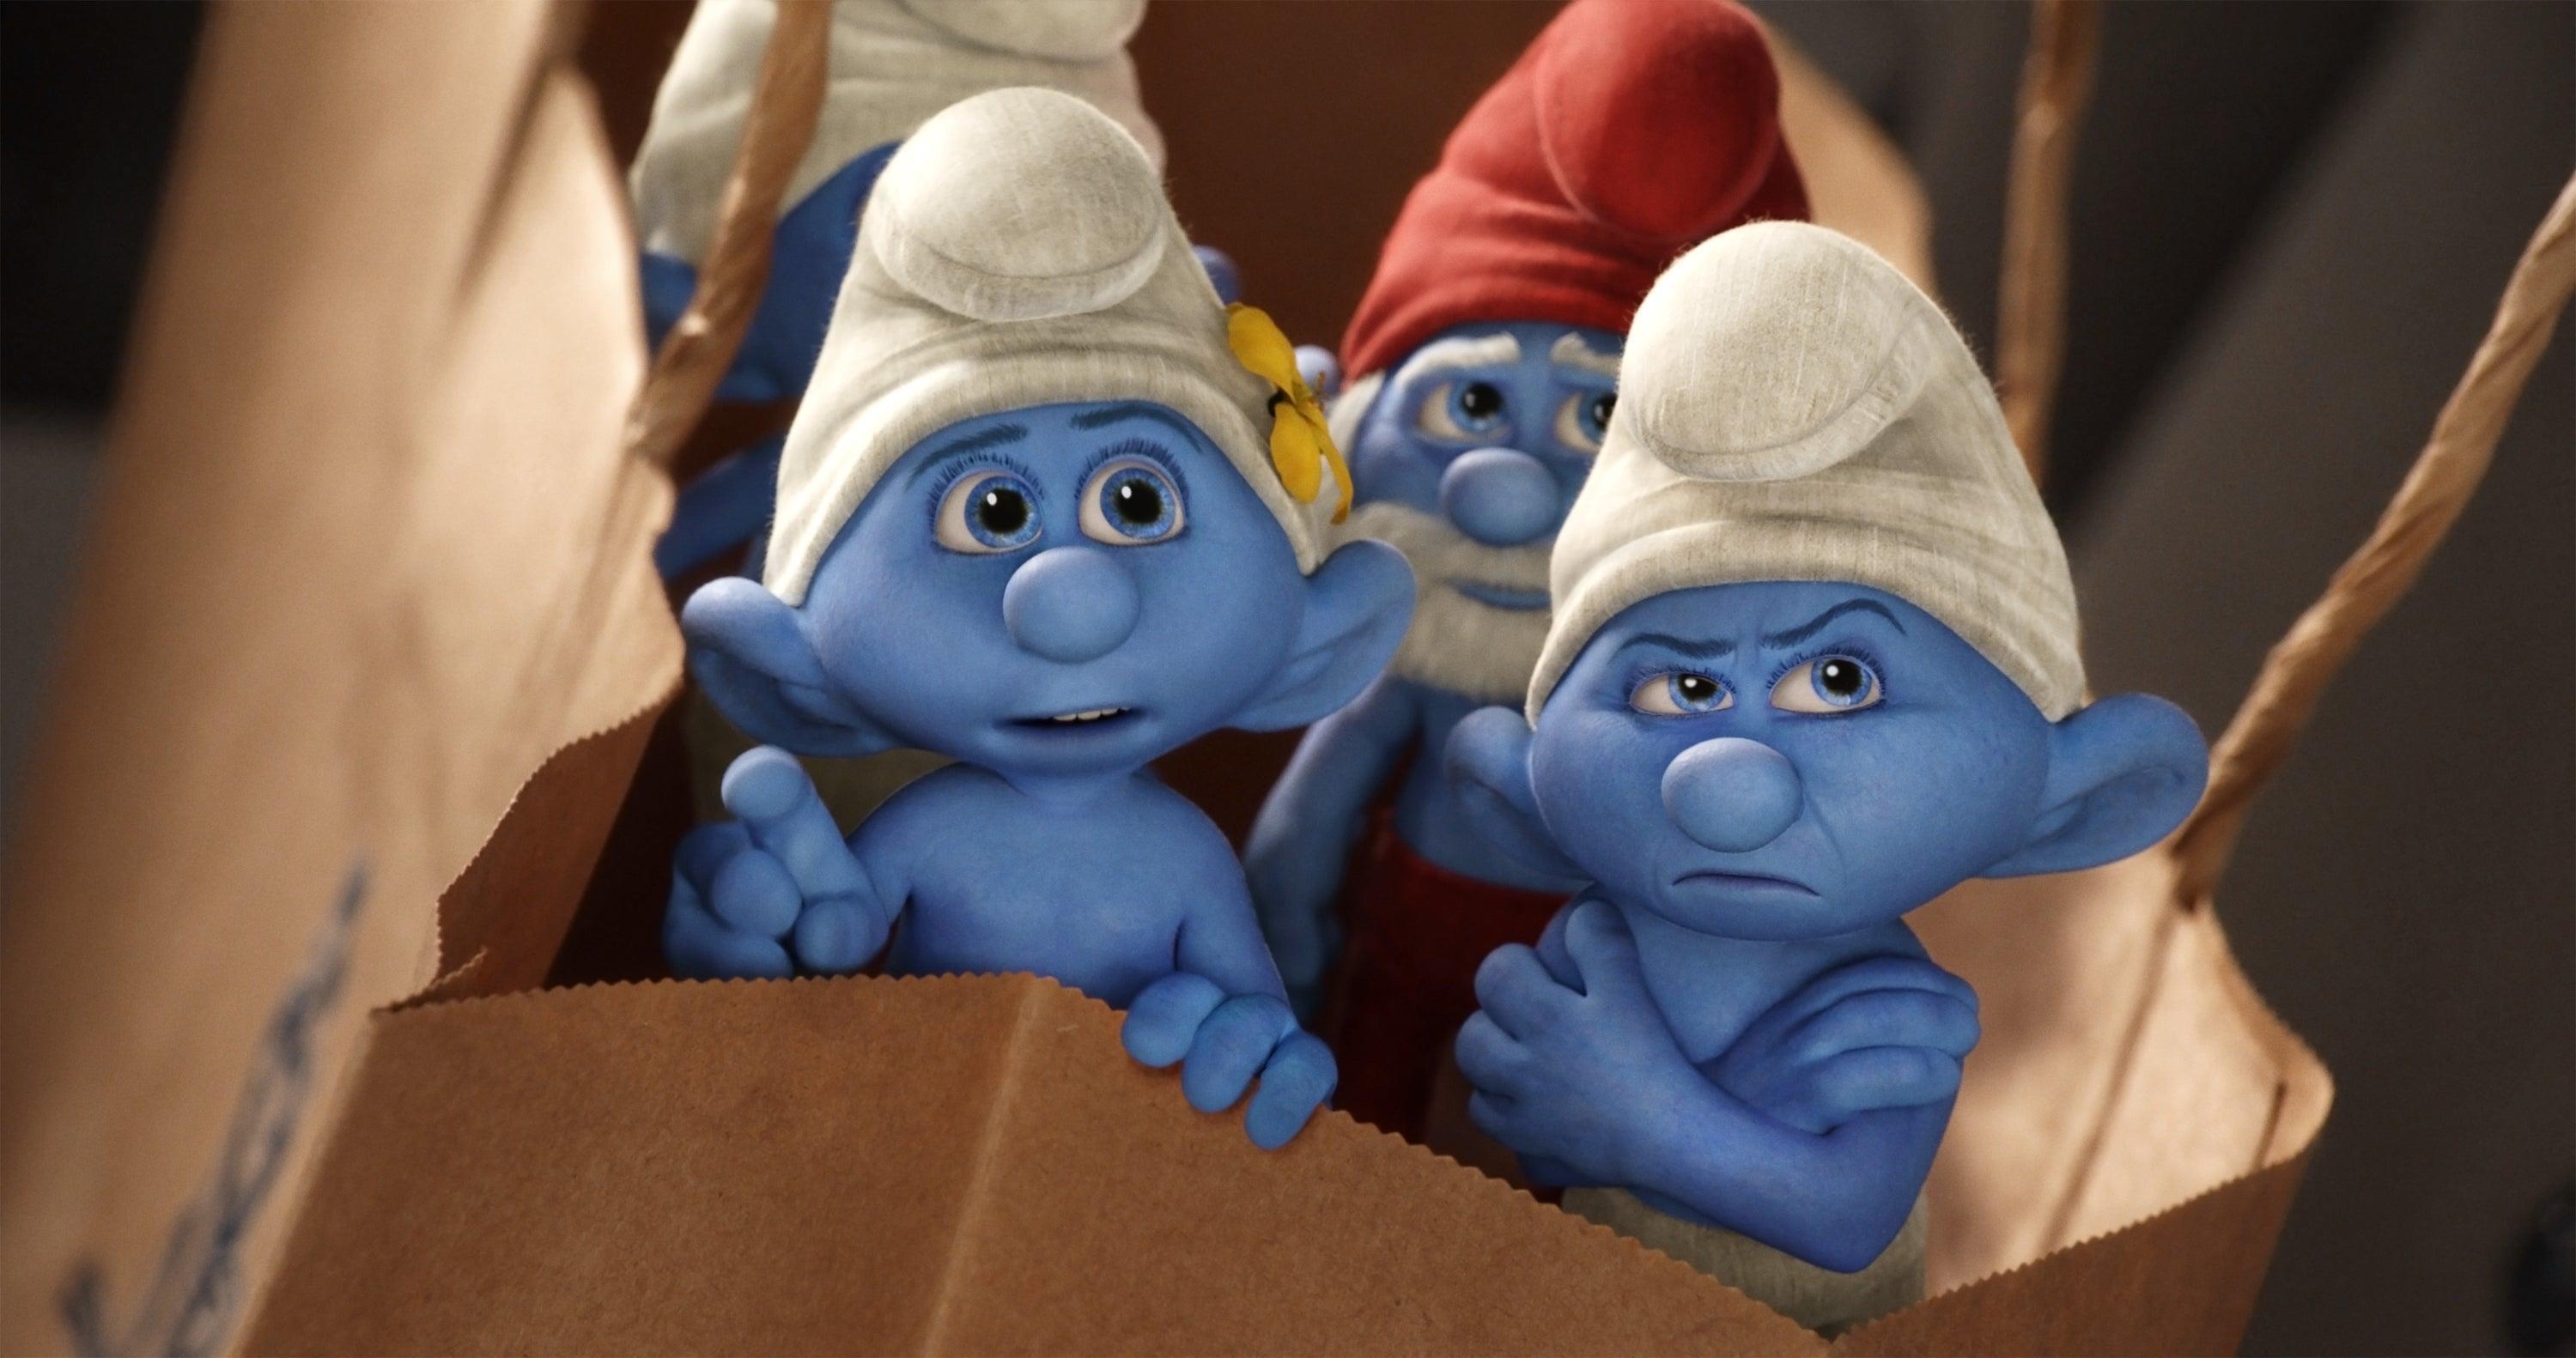 Exclusive Interview: The Smurfs 2 Director Raja Gosnell